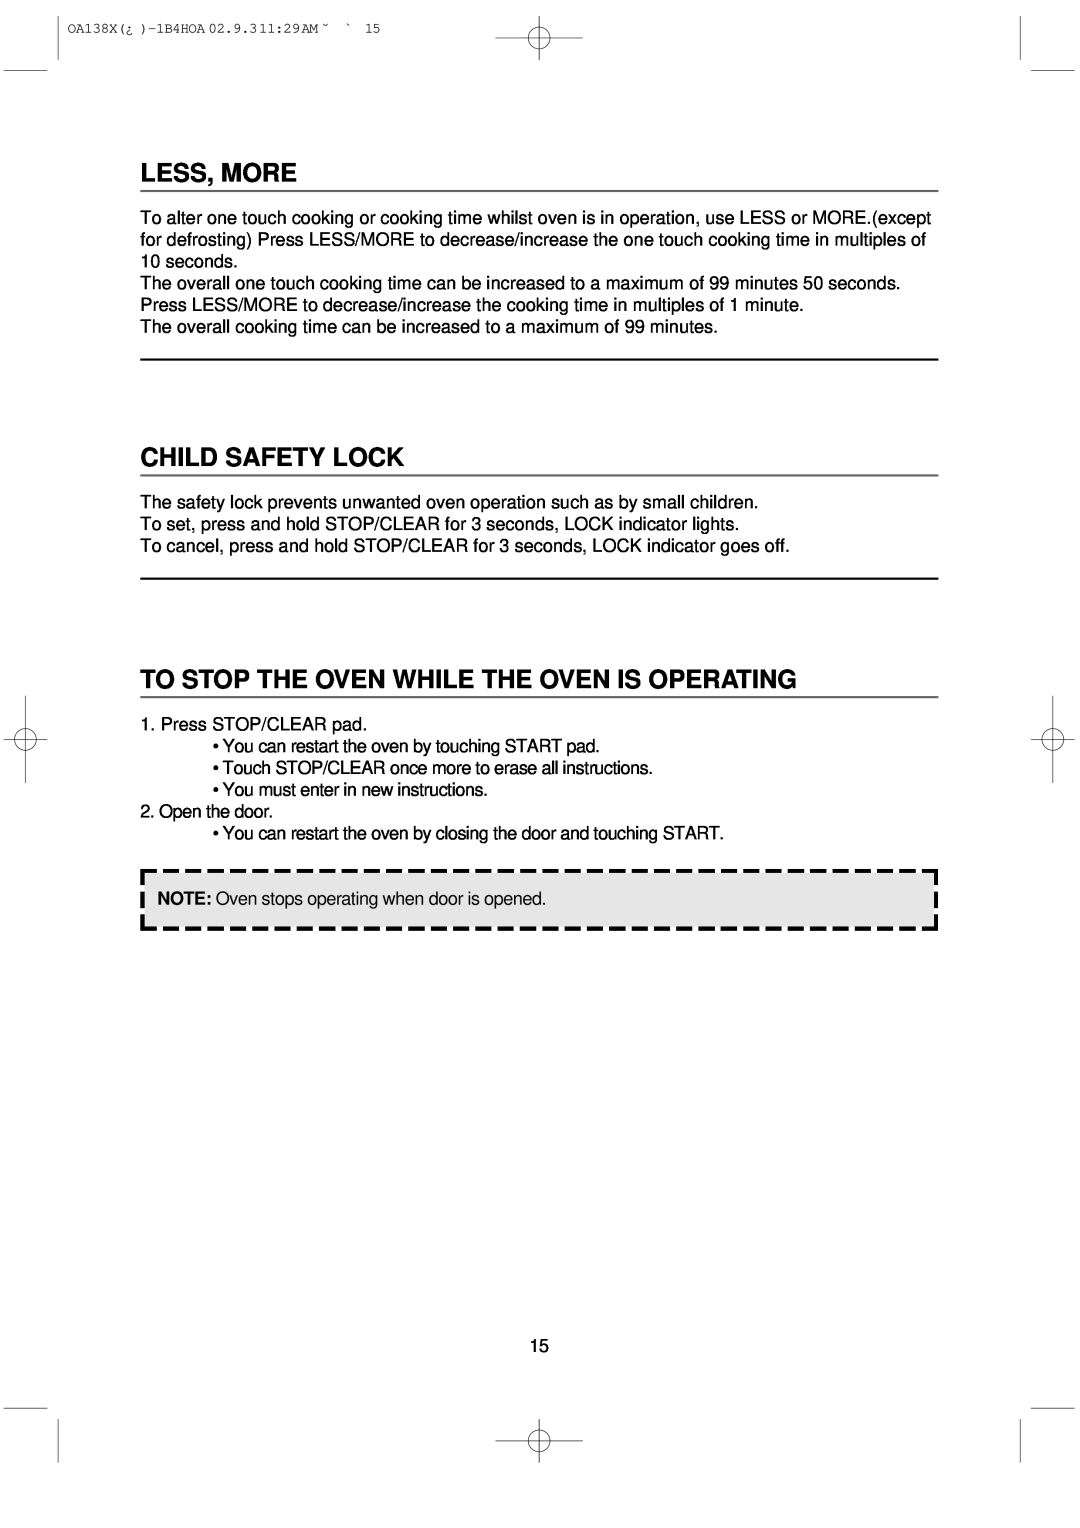 Omega OA138X manual Less, More, Child Safety Lock, To Stop The Oven While The Oven Is Operating 